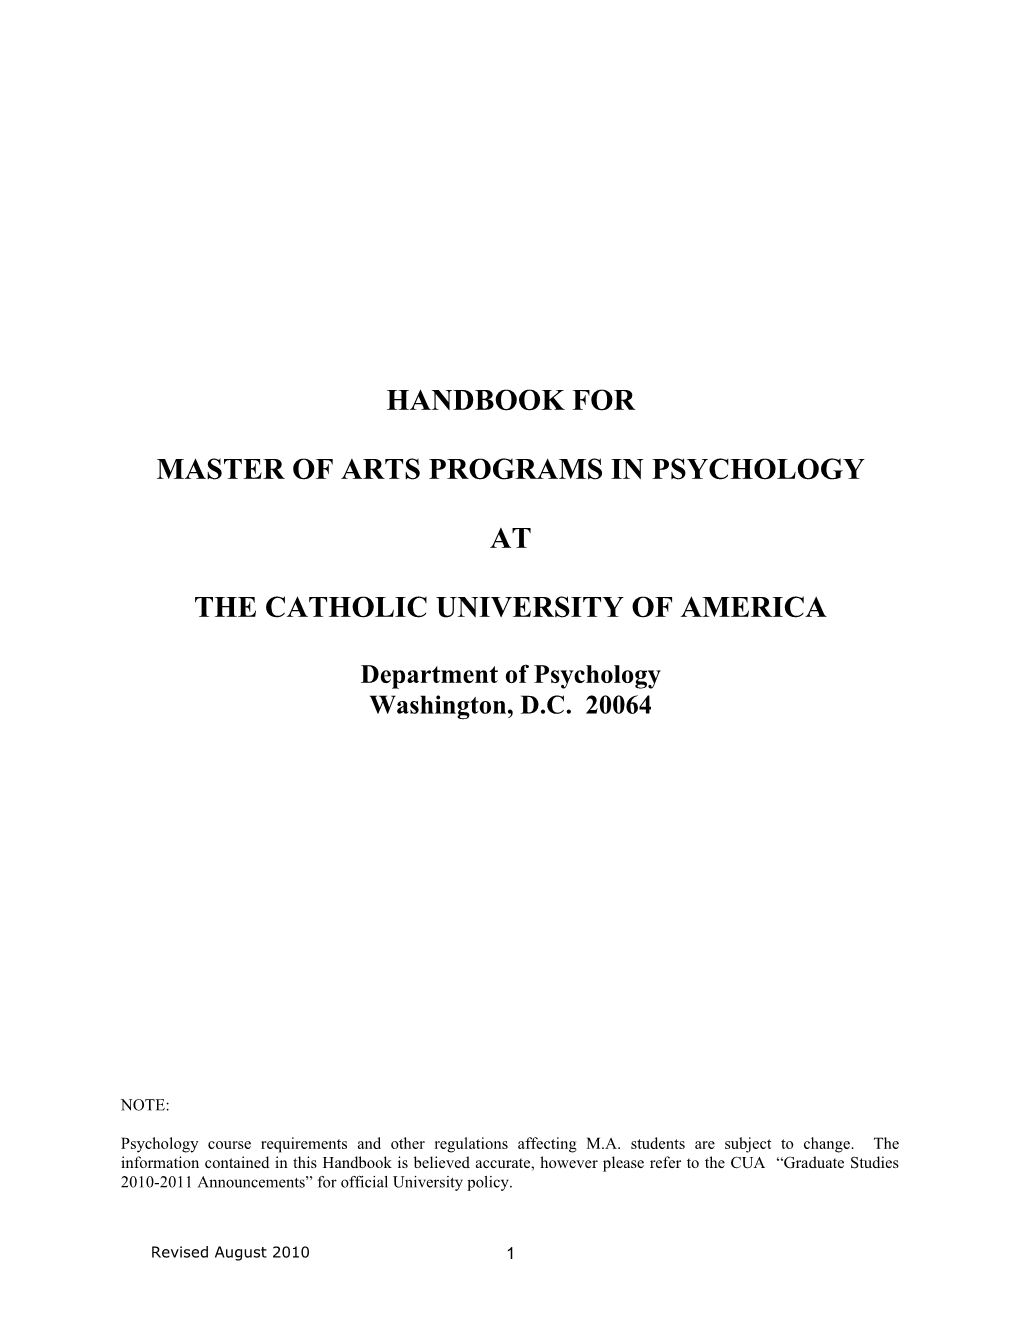 Master of Arts Programs in Psychology